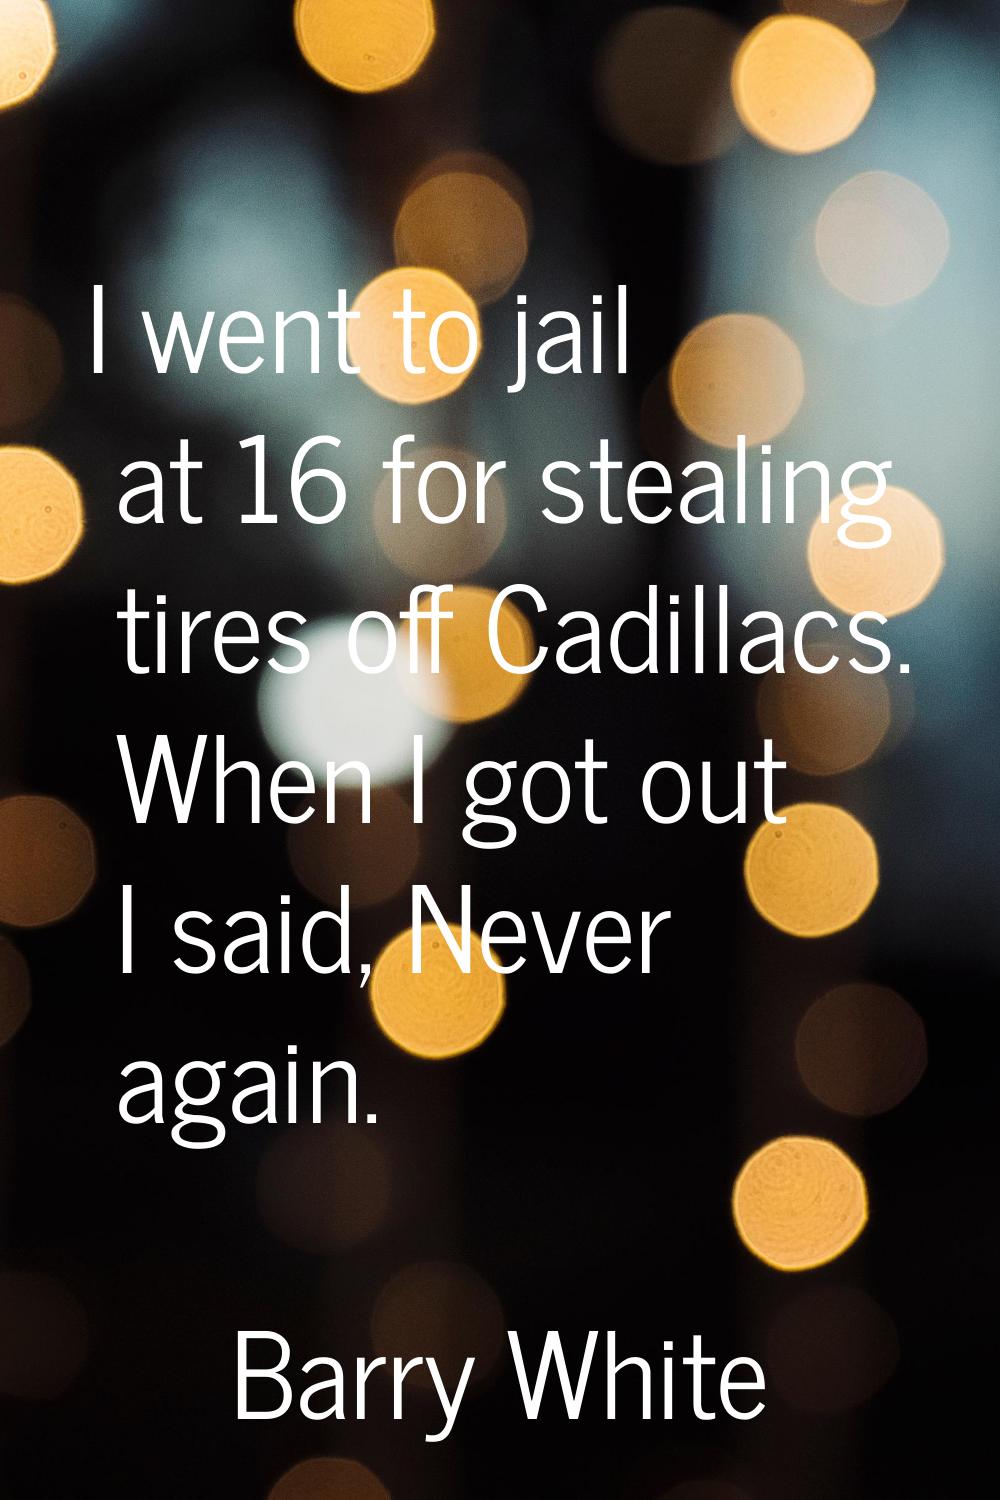 I went to jail at 16 for stealing tires off Cadillacs. When I got out I said, Never again.